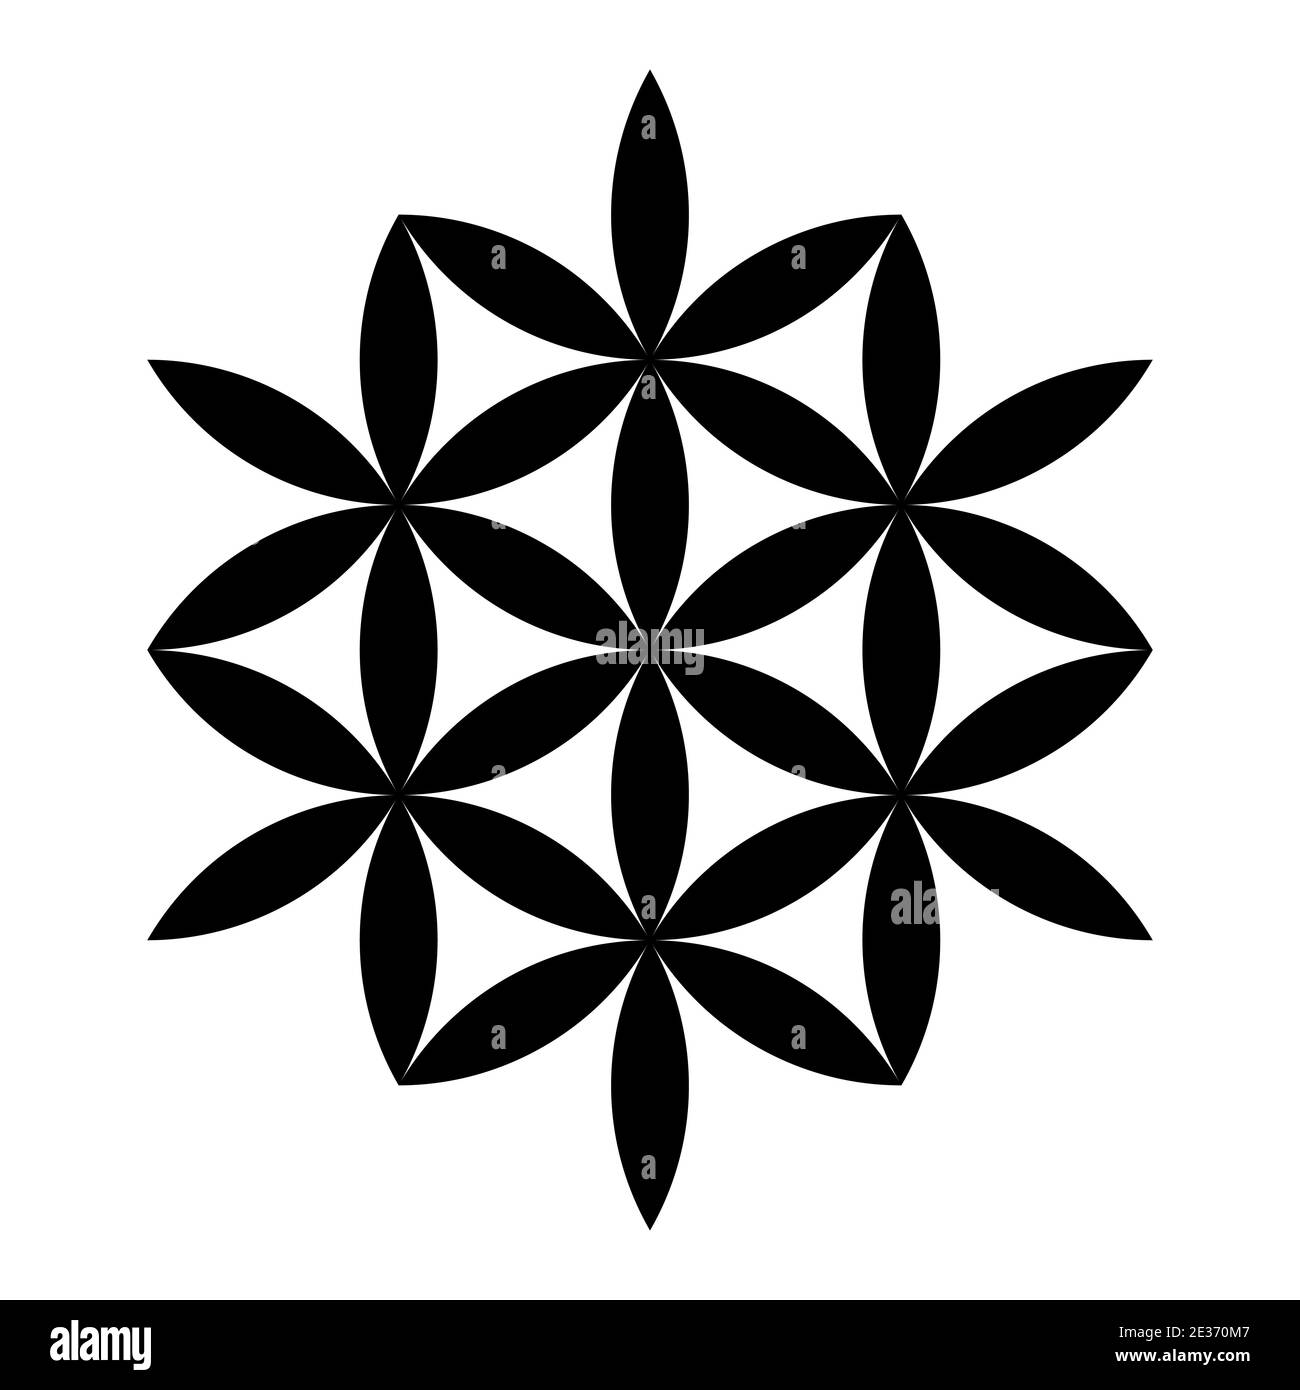 Seven stars, made from vesica piscis lens shapes. Six flower-like stars, with interlocking petals, make a seventh star. Derived from Flower of Life. Stock Photo